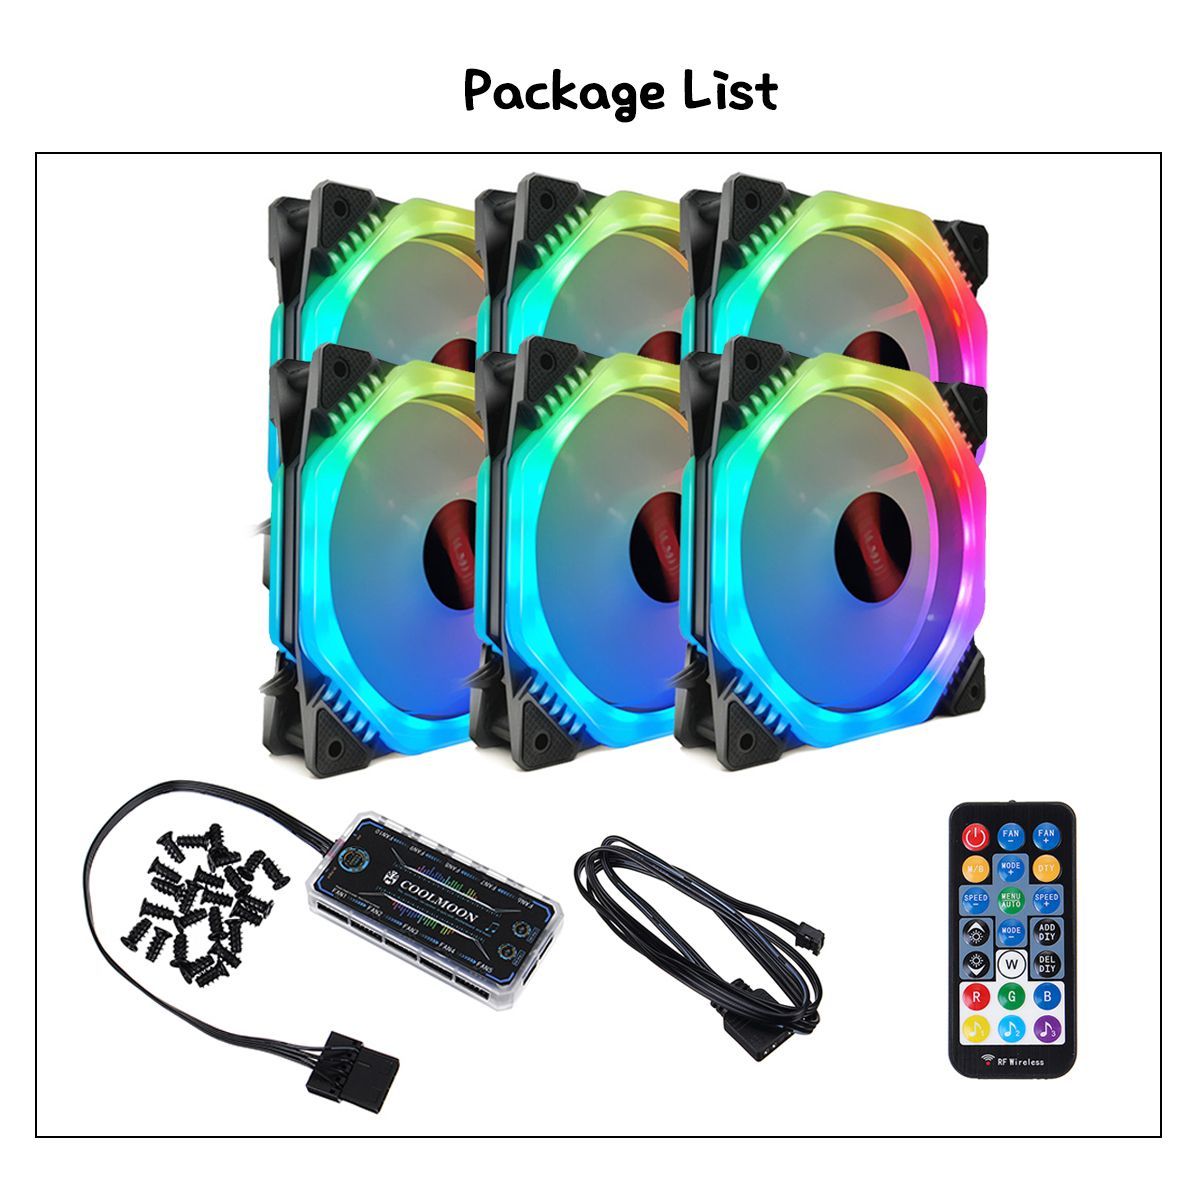 Coolmoon--6PCS-5V-3Pin-Adjustable-RGB-LED-Light-Computer-Case-PC-Cooling-Fan-with-Remote-1549662